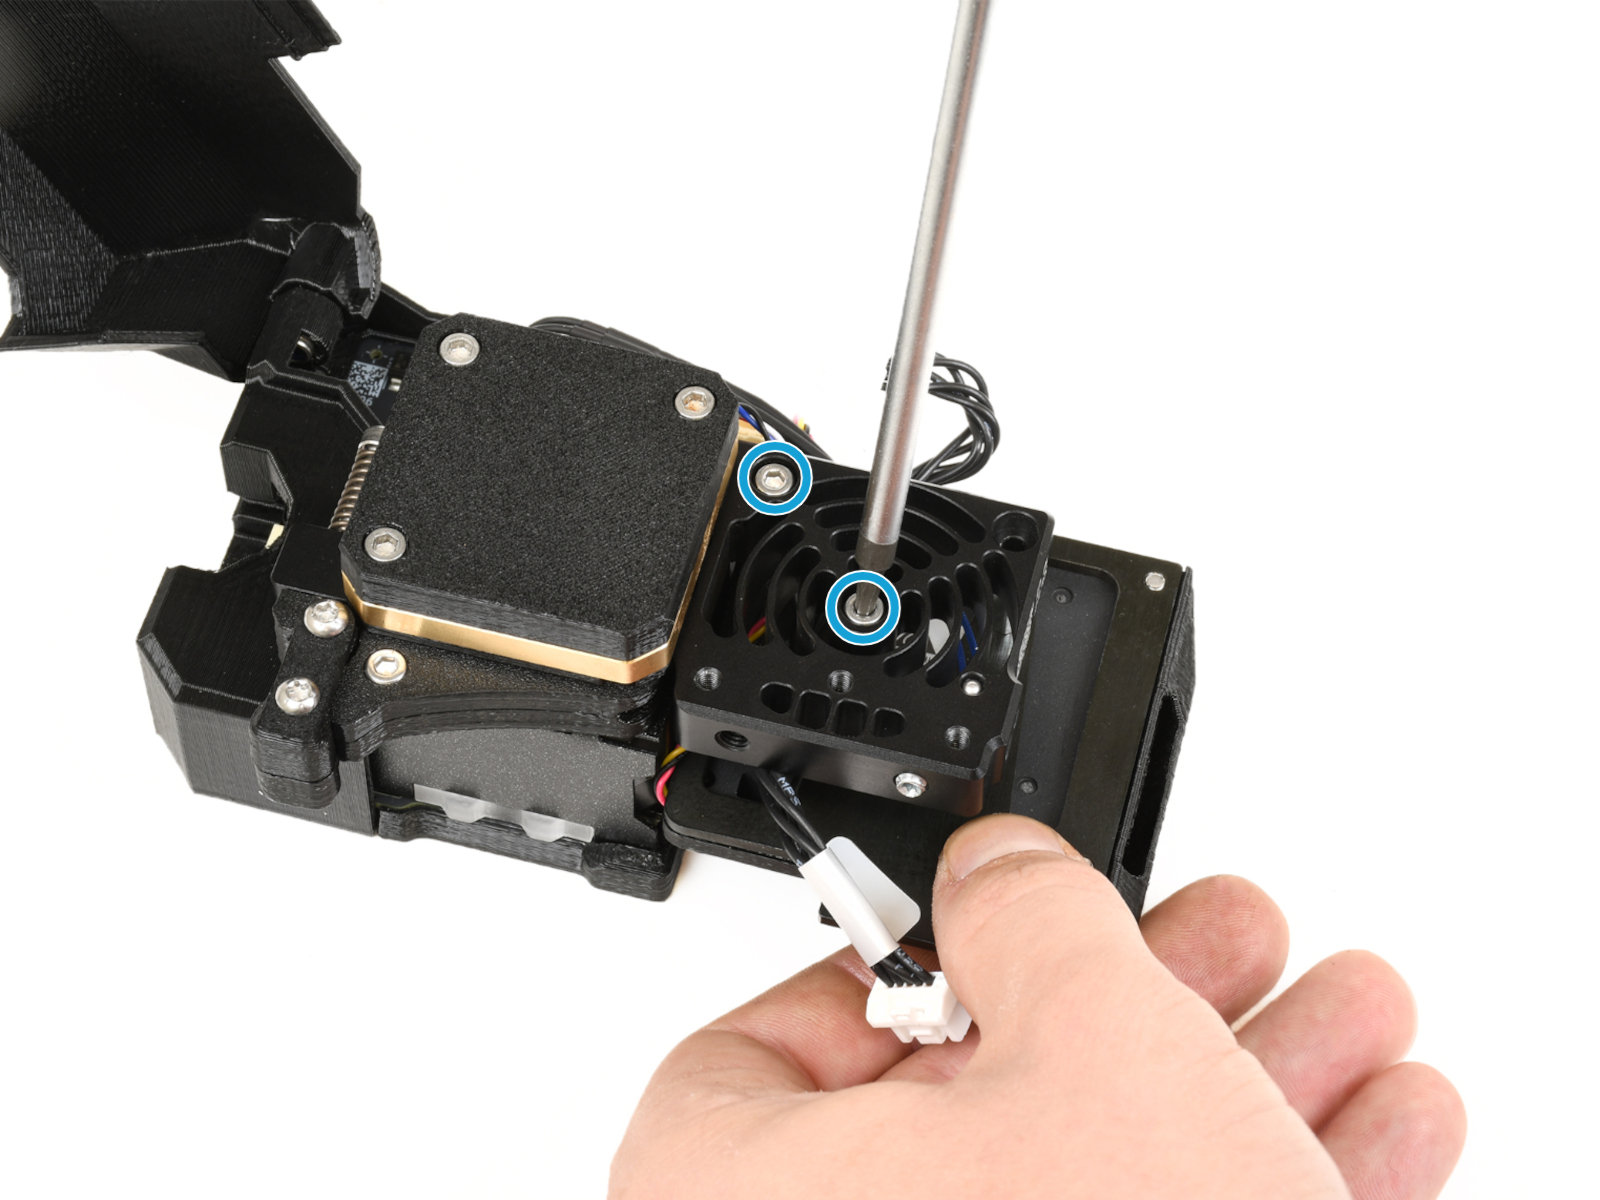 Attaching the Tool Changer board & print fan assembly